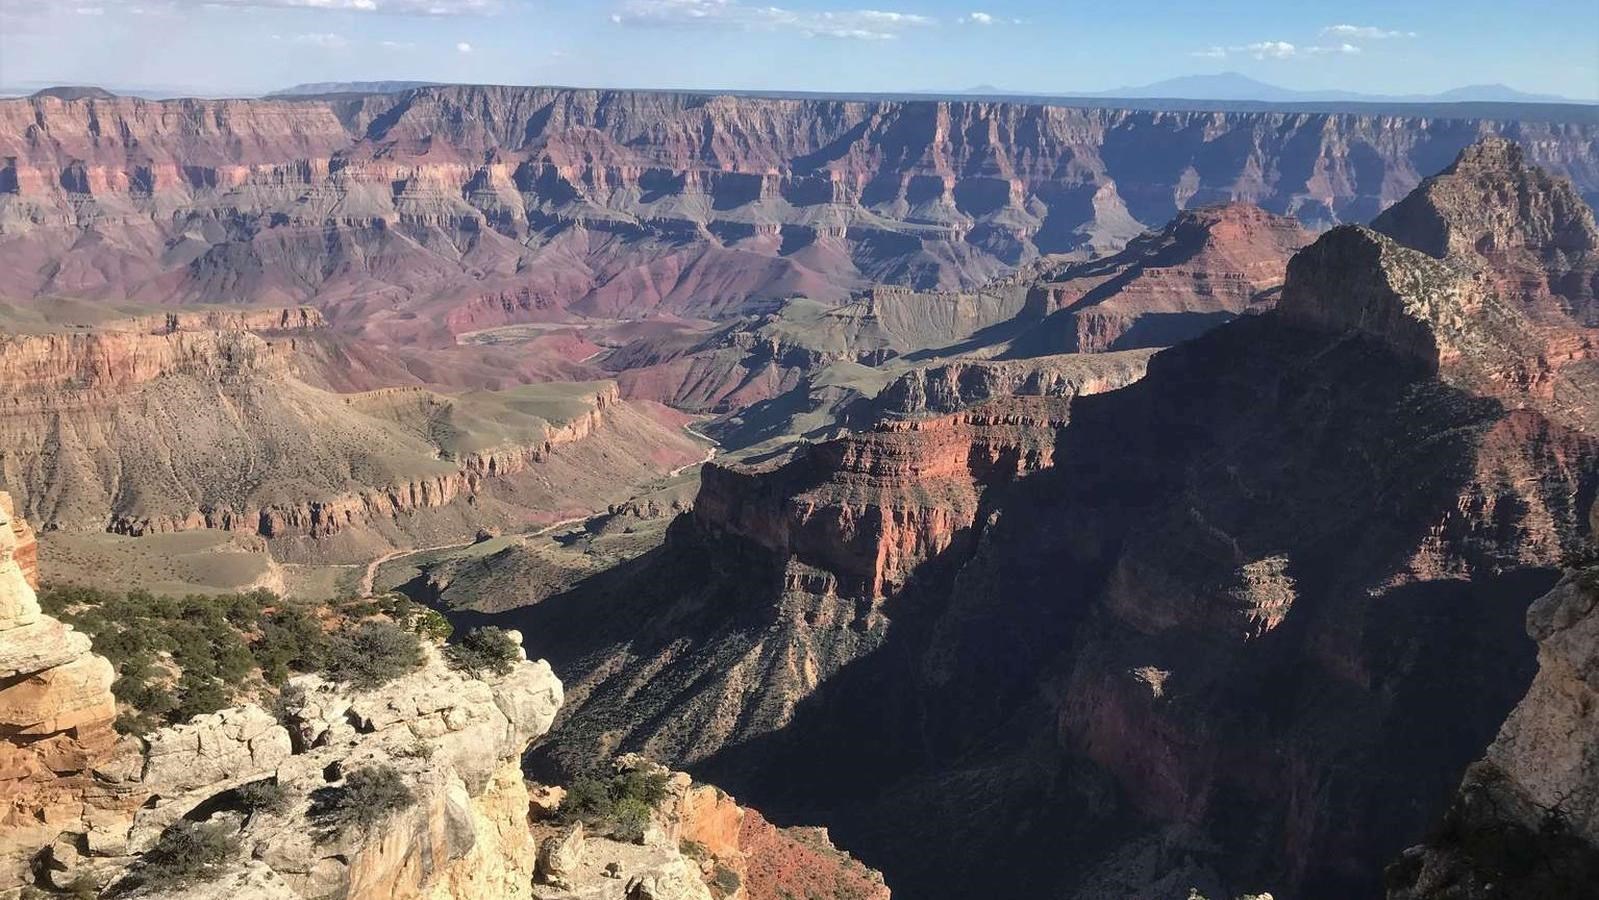 Steep cliffs are shadowed to the right as multicolored horizontal layers make up the Grand Canyon.